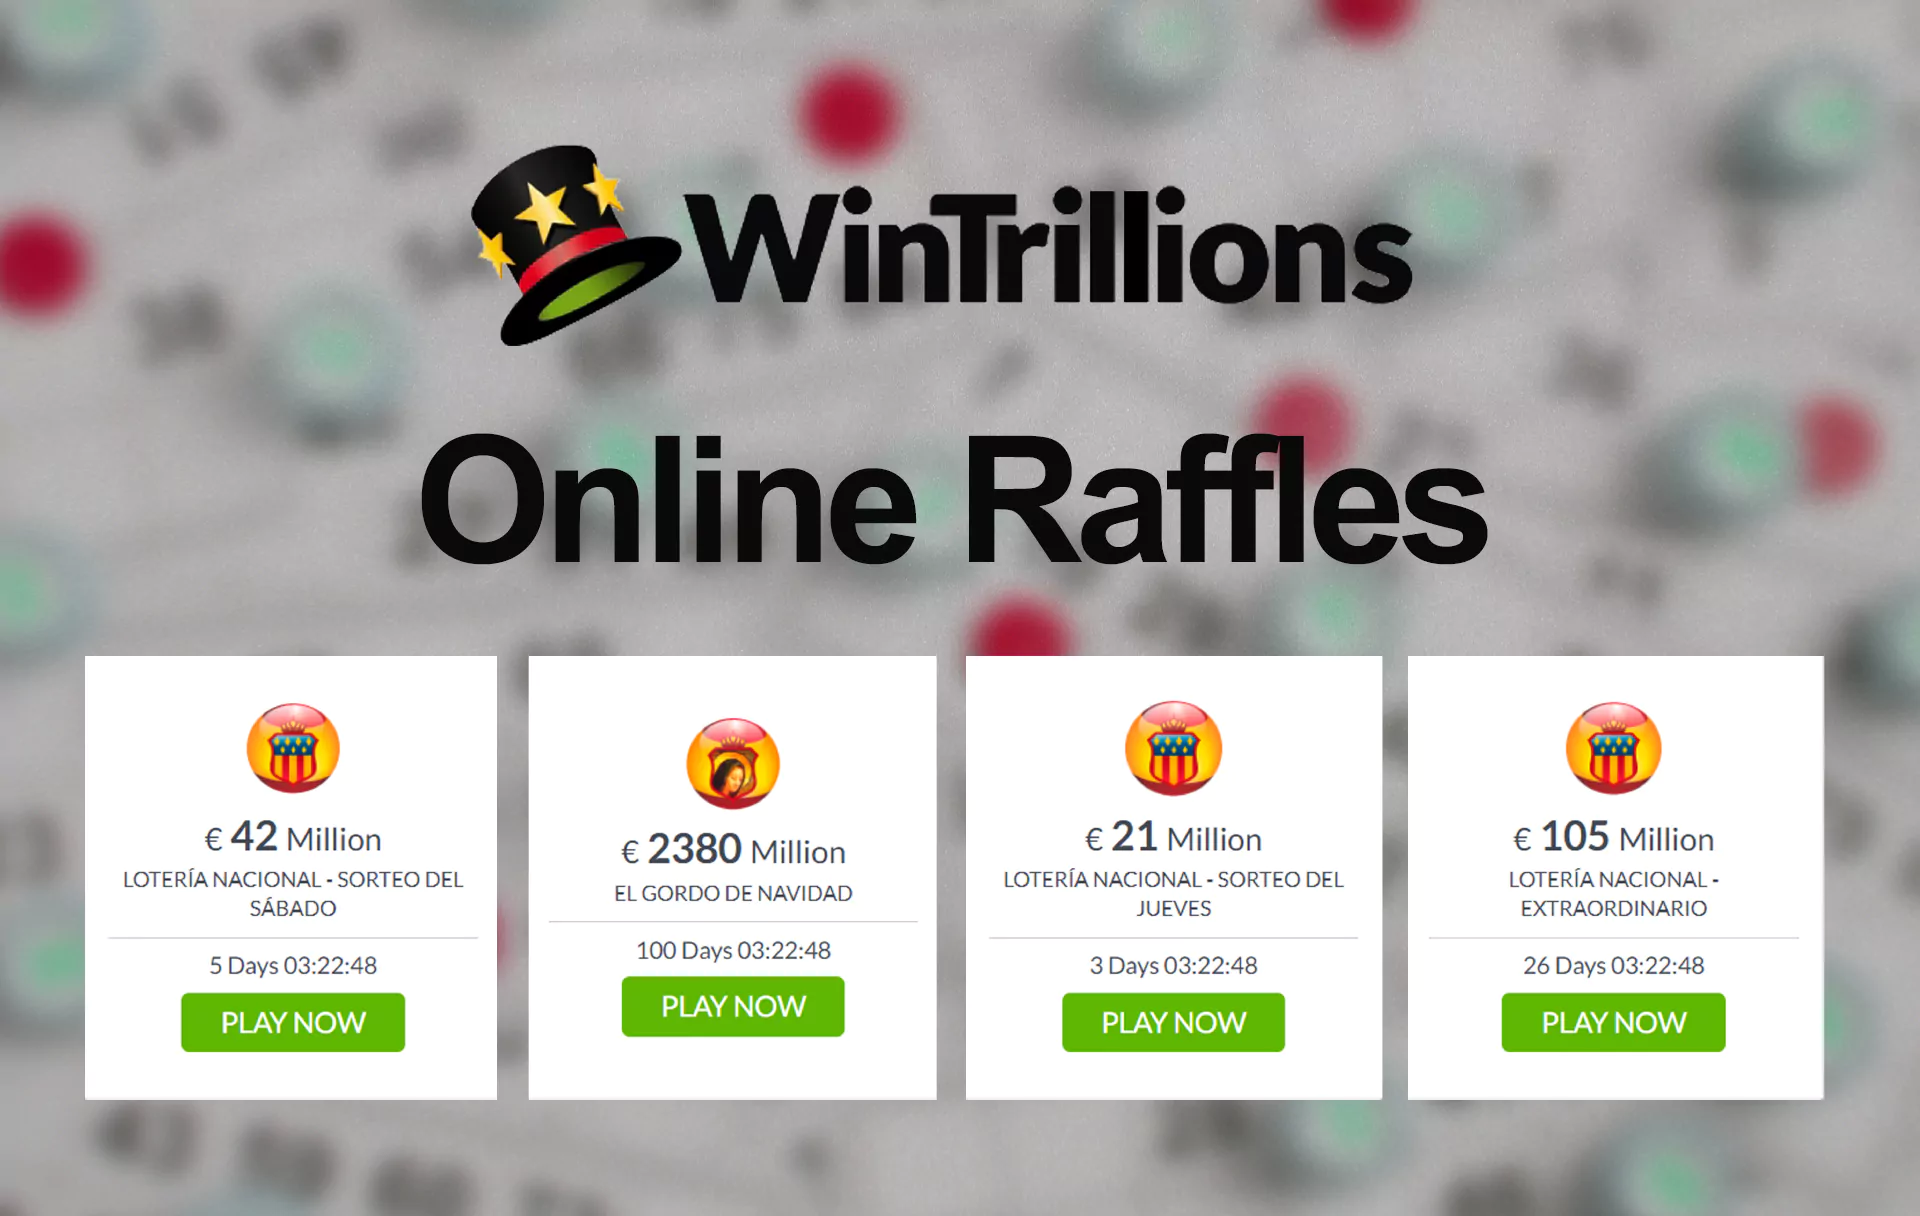 Raffles are very simple types of lotteries that randomly give prizes.